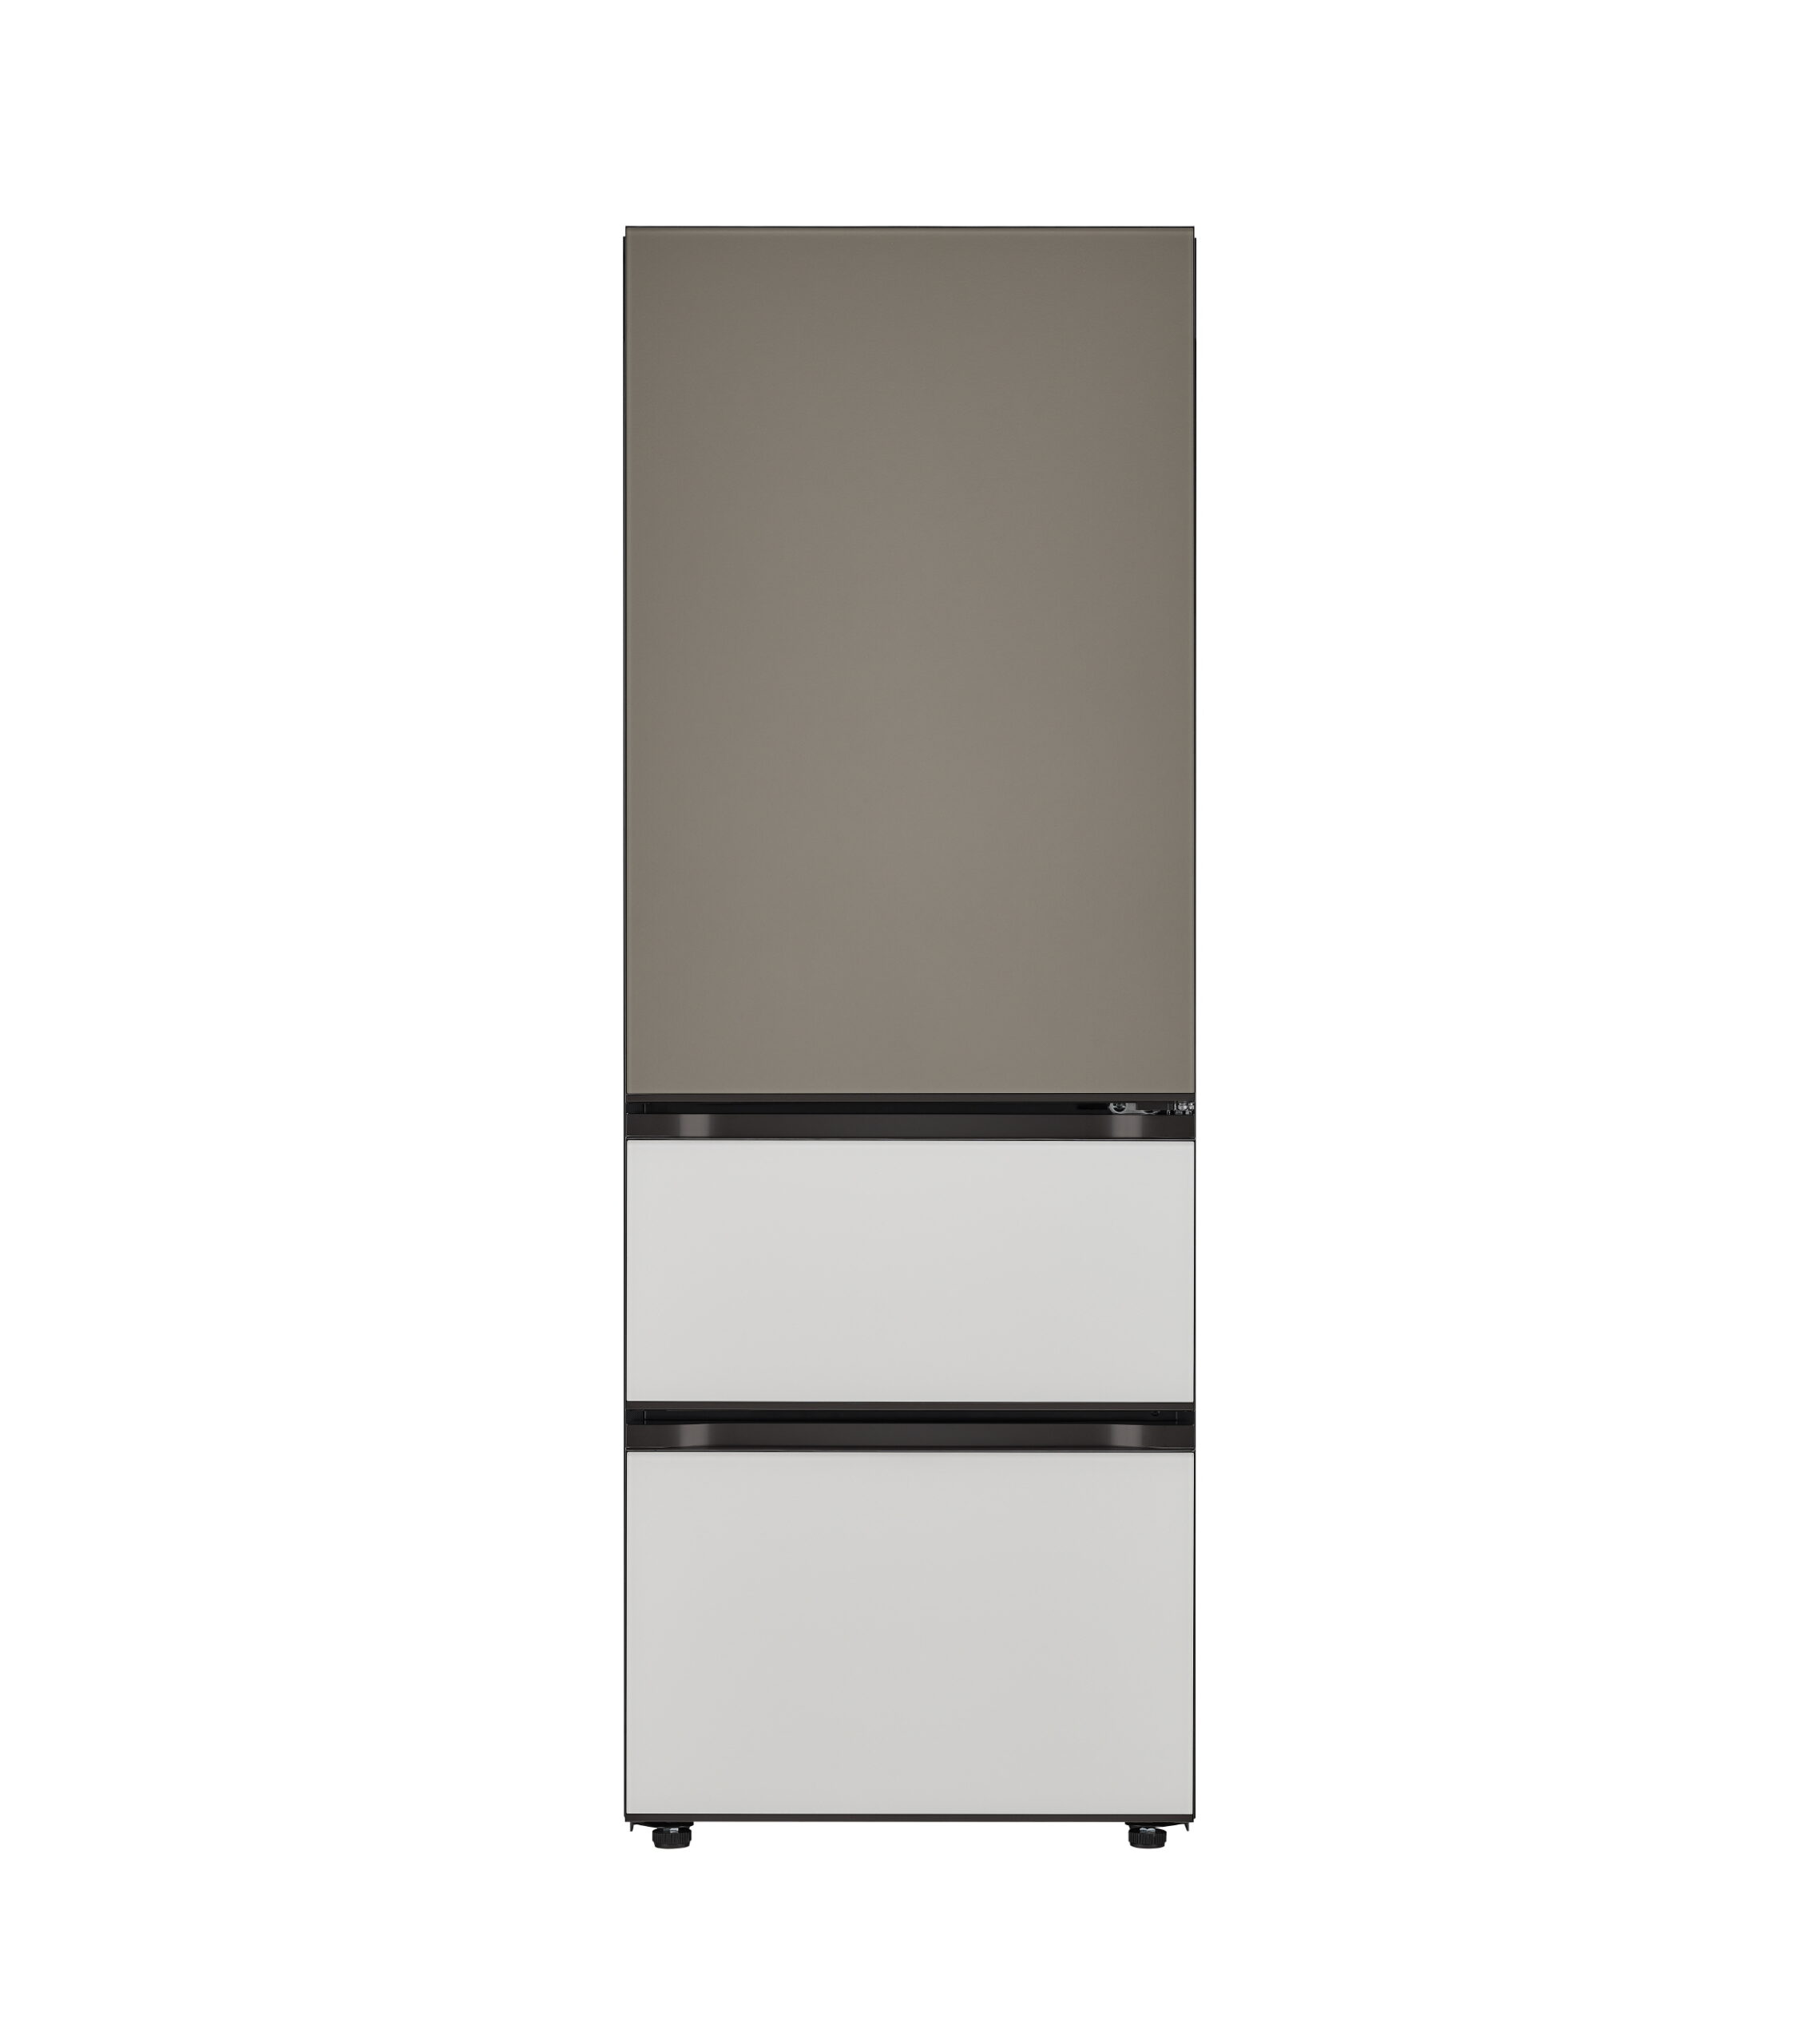 LG MoodUPTM kimchi refrigerator in Lux Gray and Lux White color